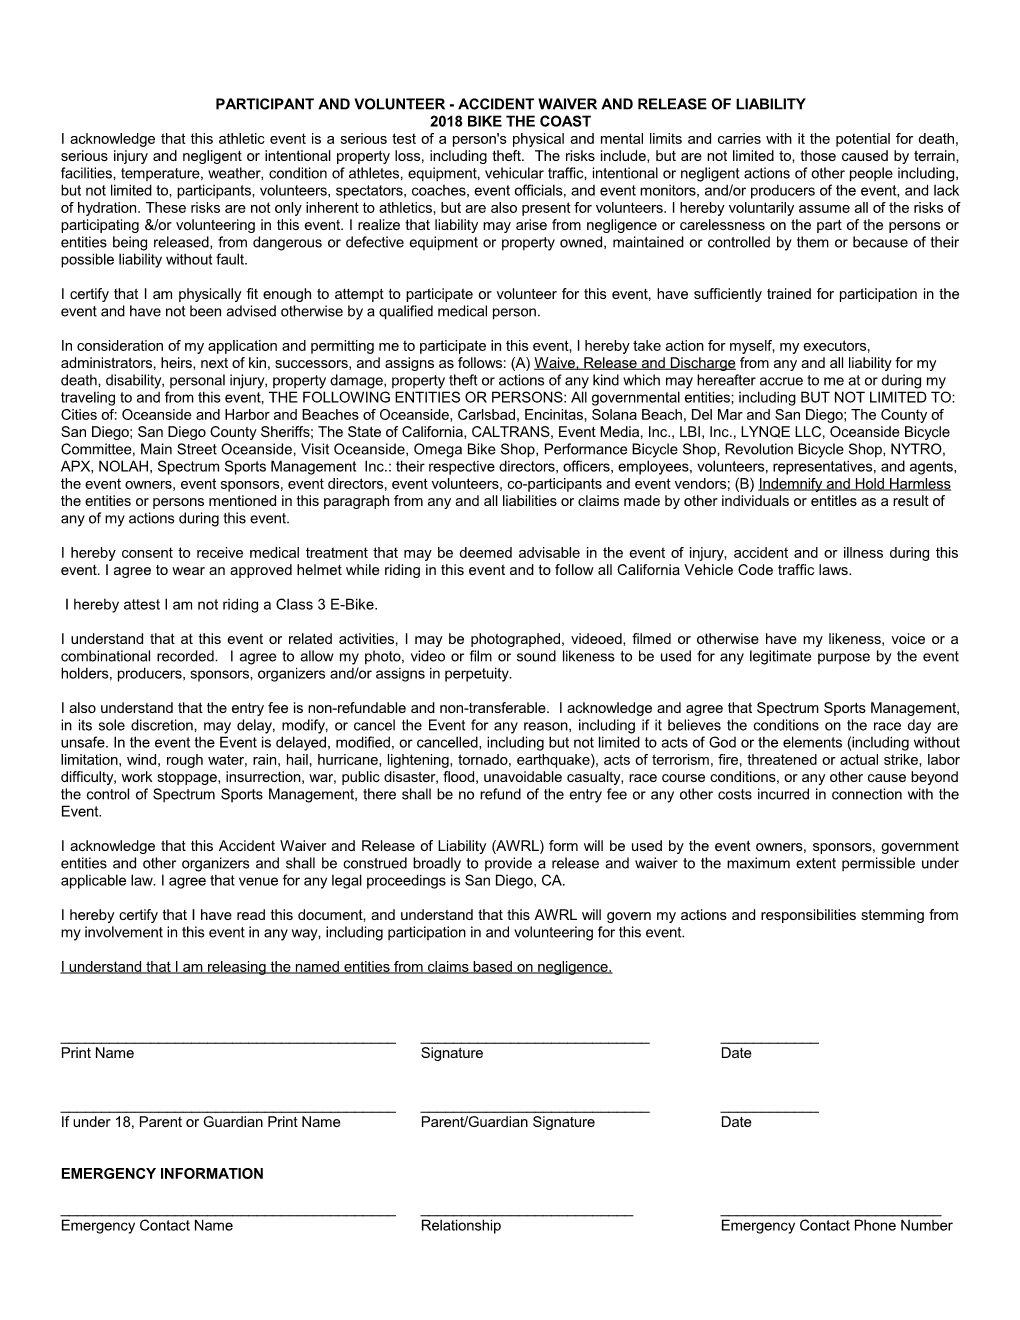 Participant and Volunteer - Accident Waiver and Release of Liability